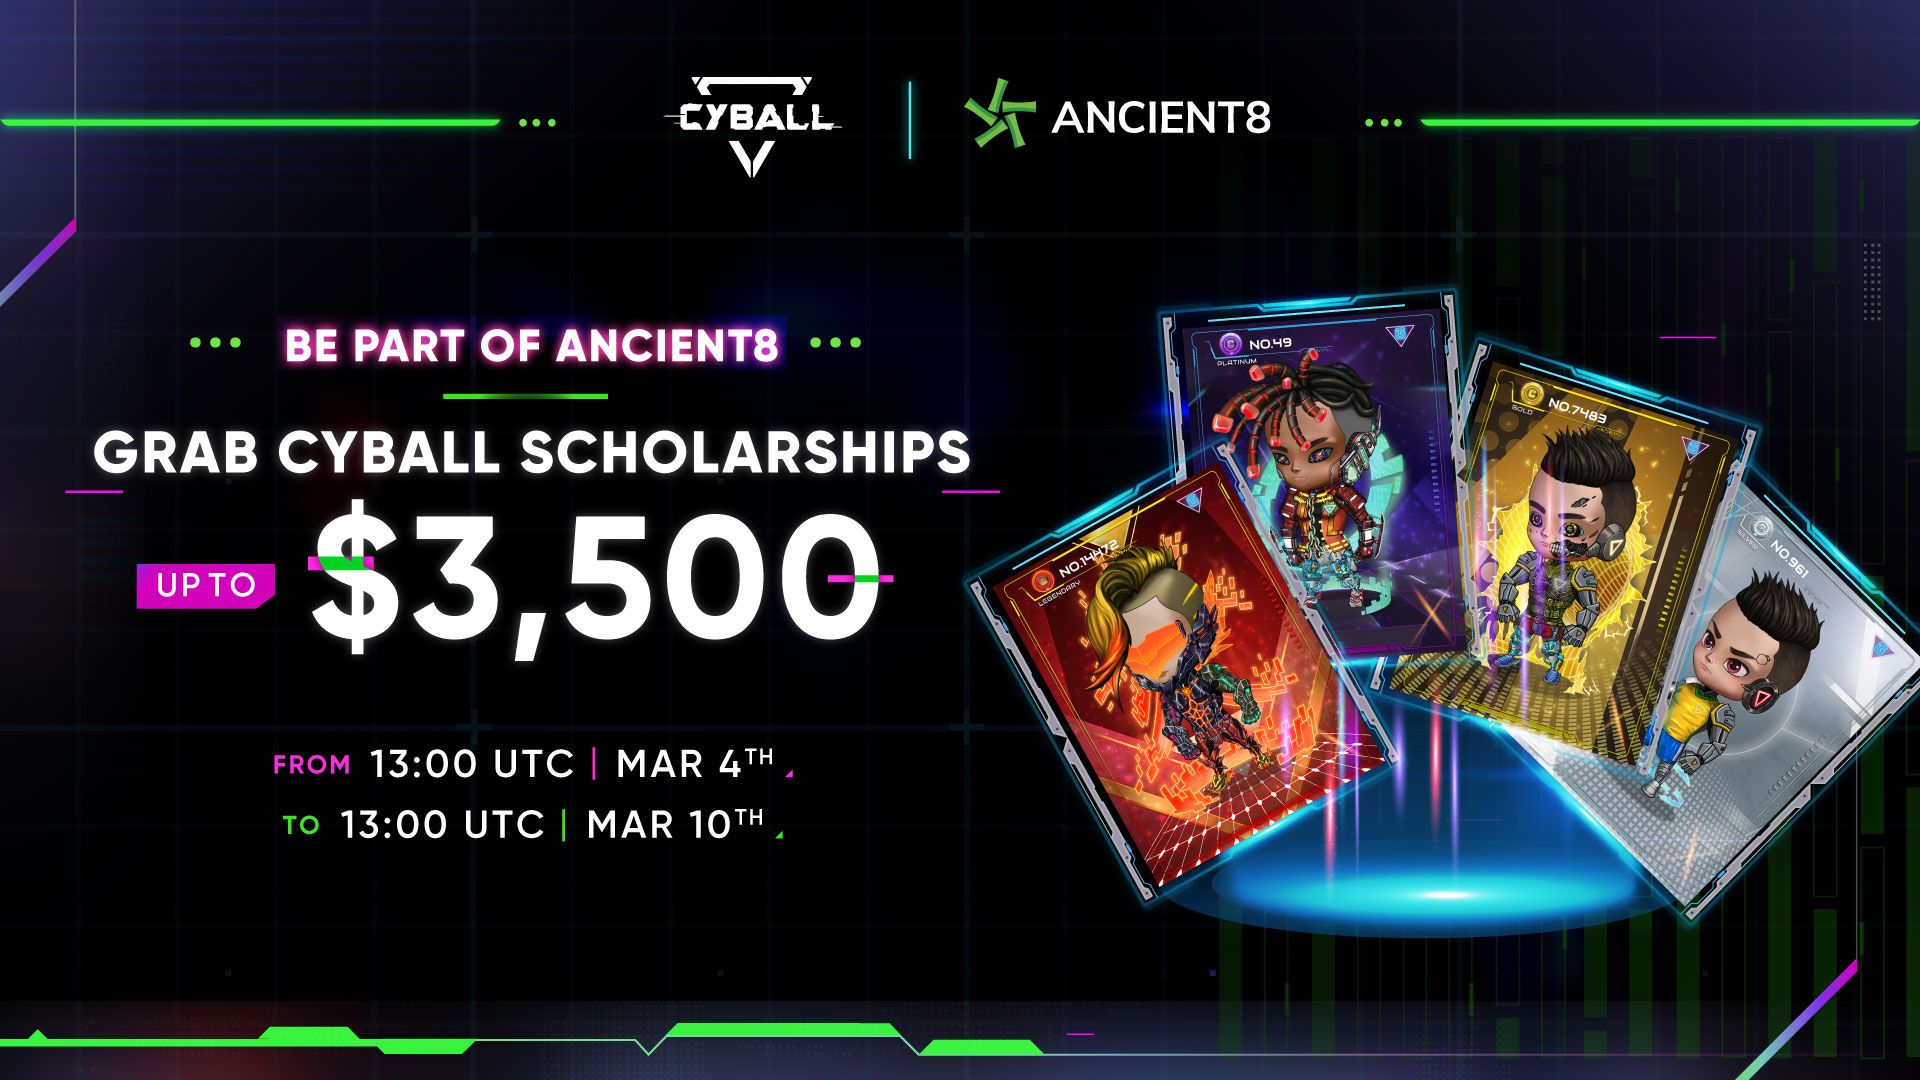 Be part of Ancient8 - Grab CyBall Scholarships up to $3,500